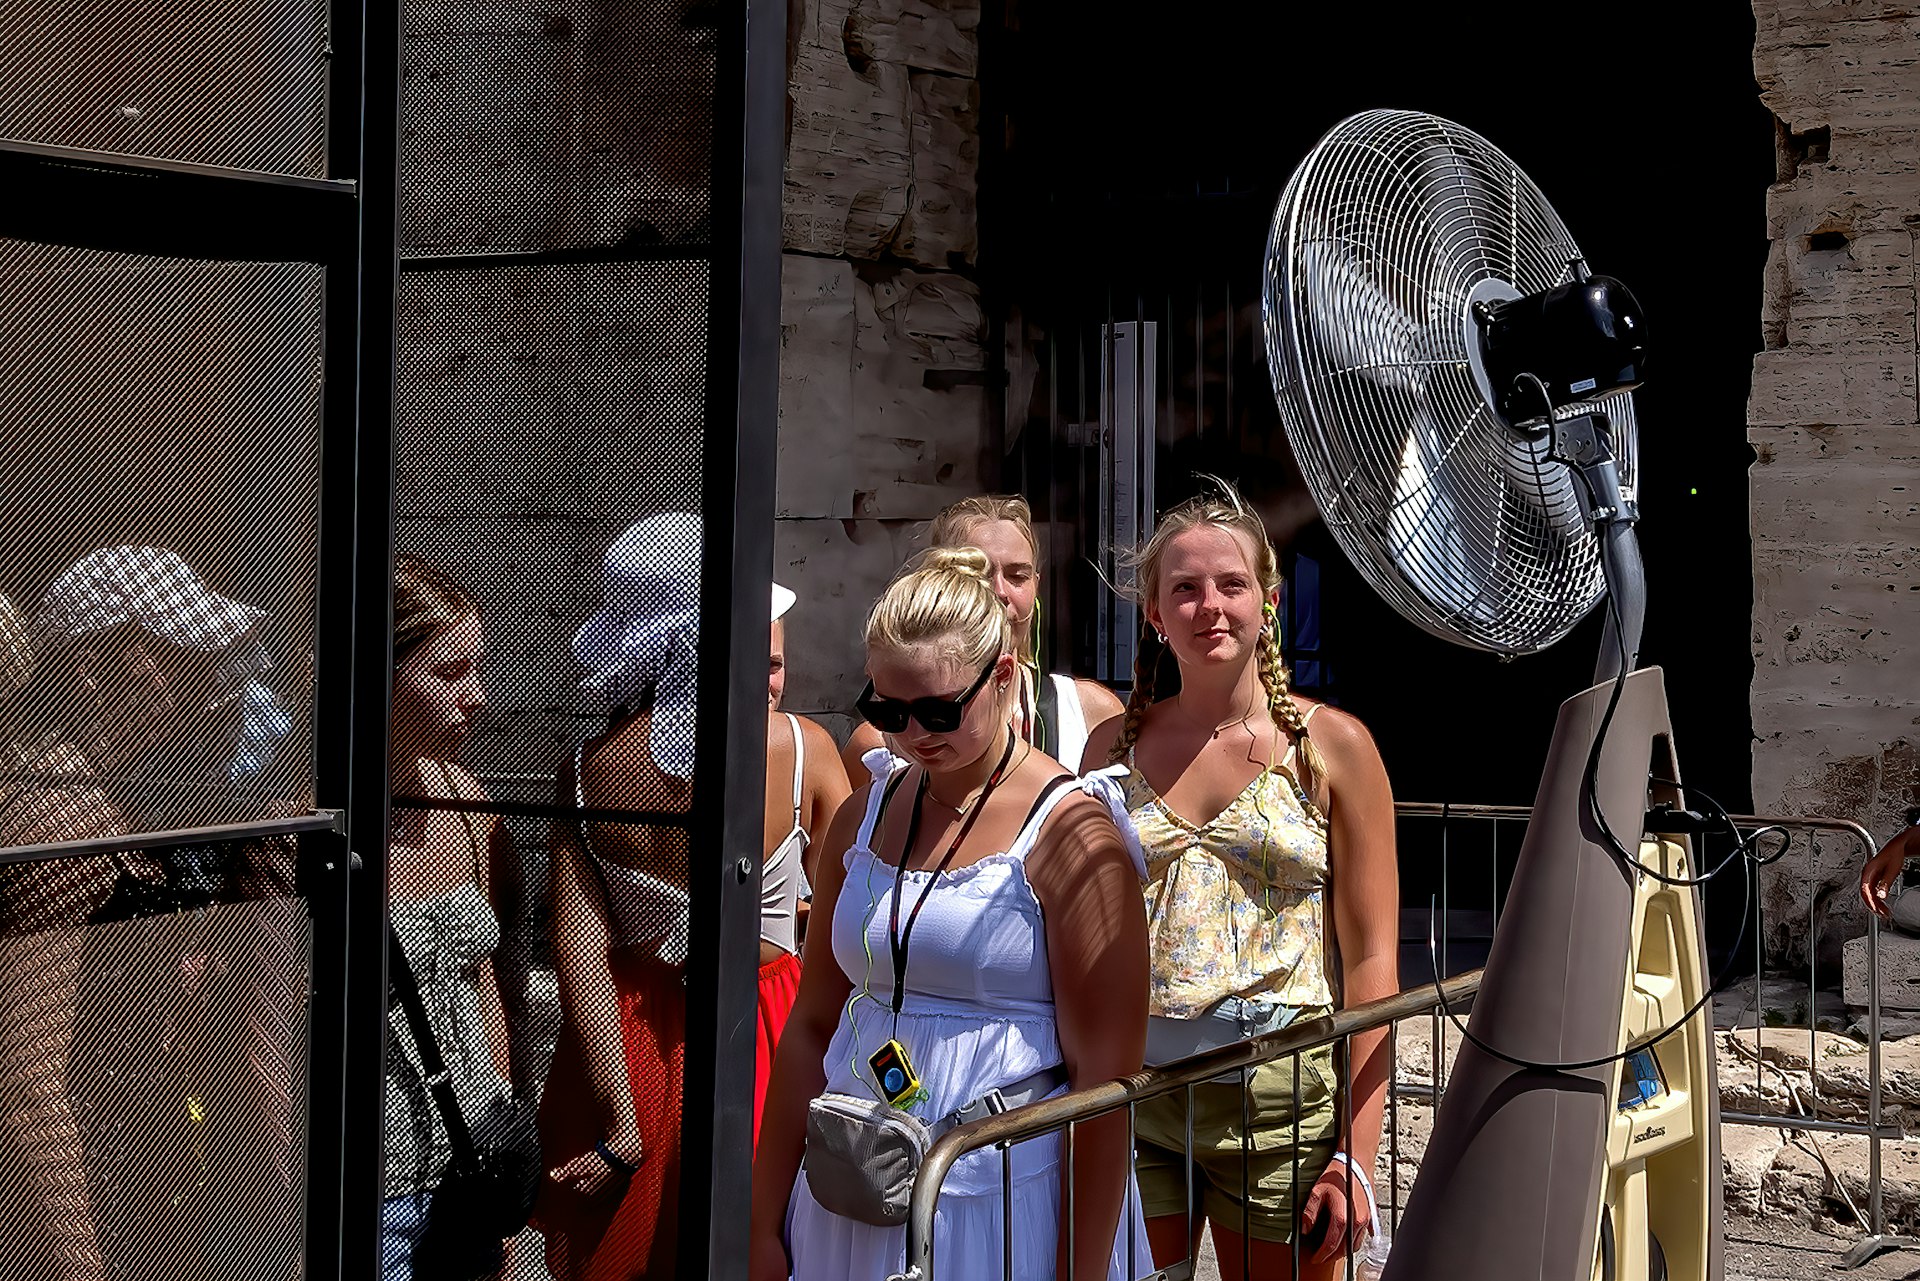 Tourists are refreshed by a fan spraying nebulized water at Colosseo area (Colosseum), Rome, Italy